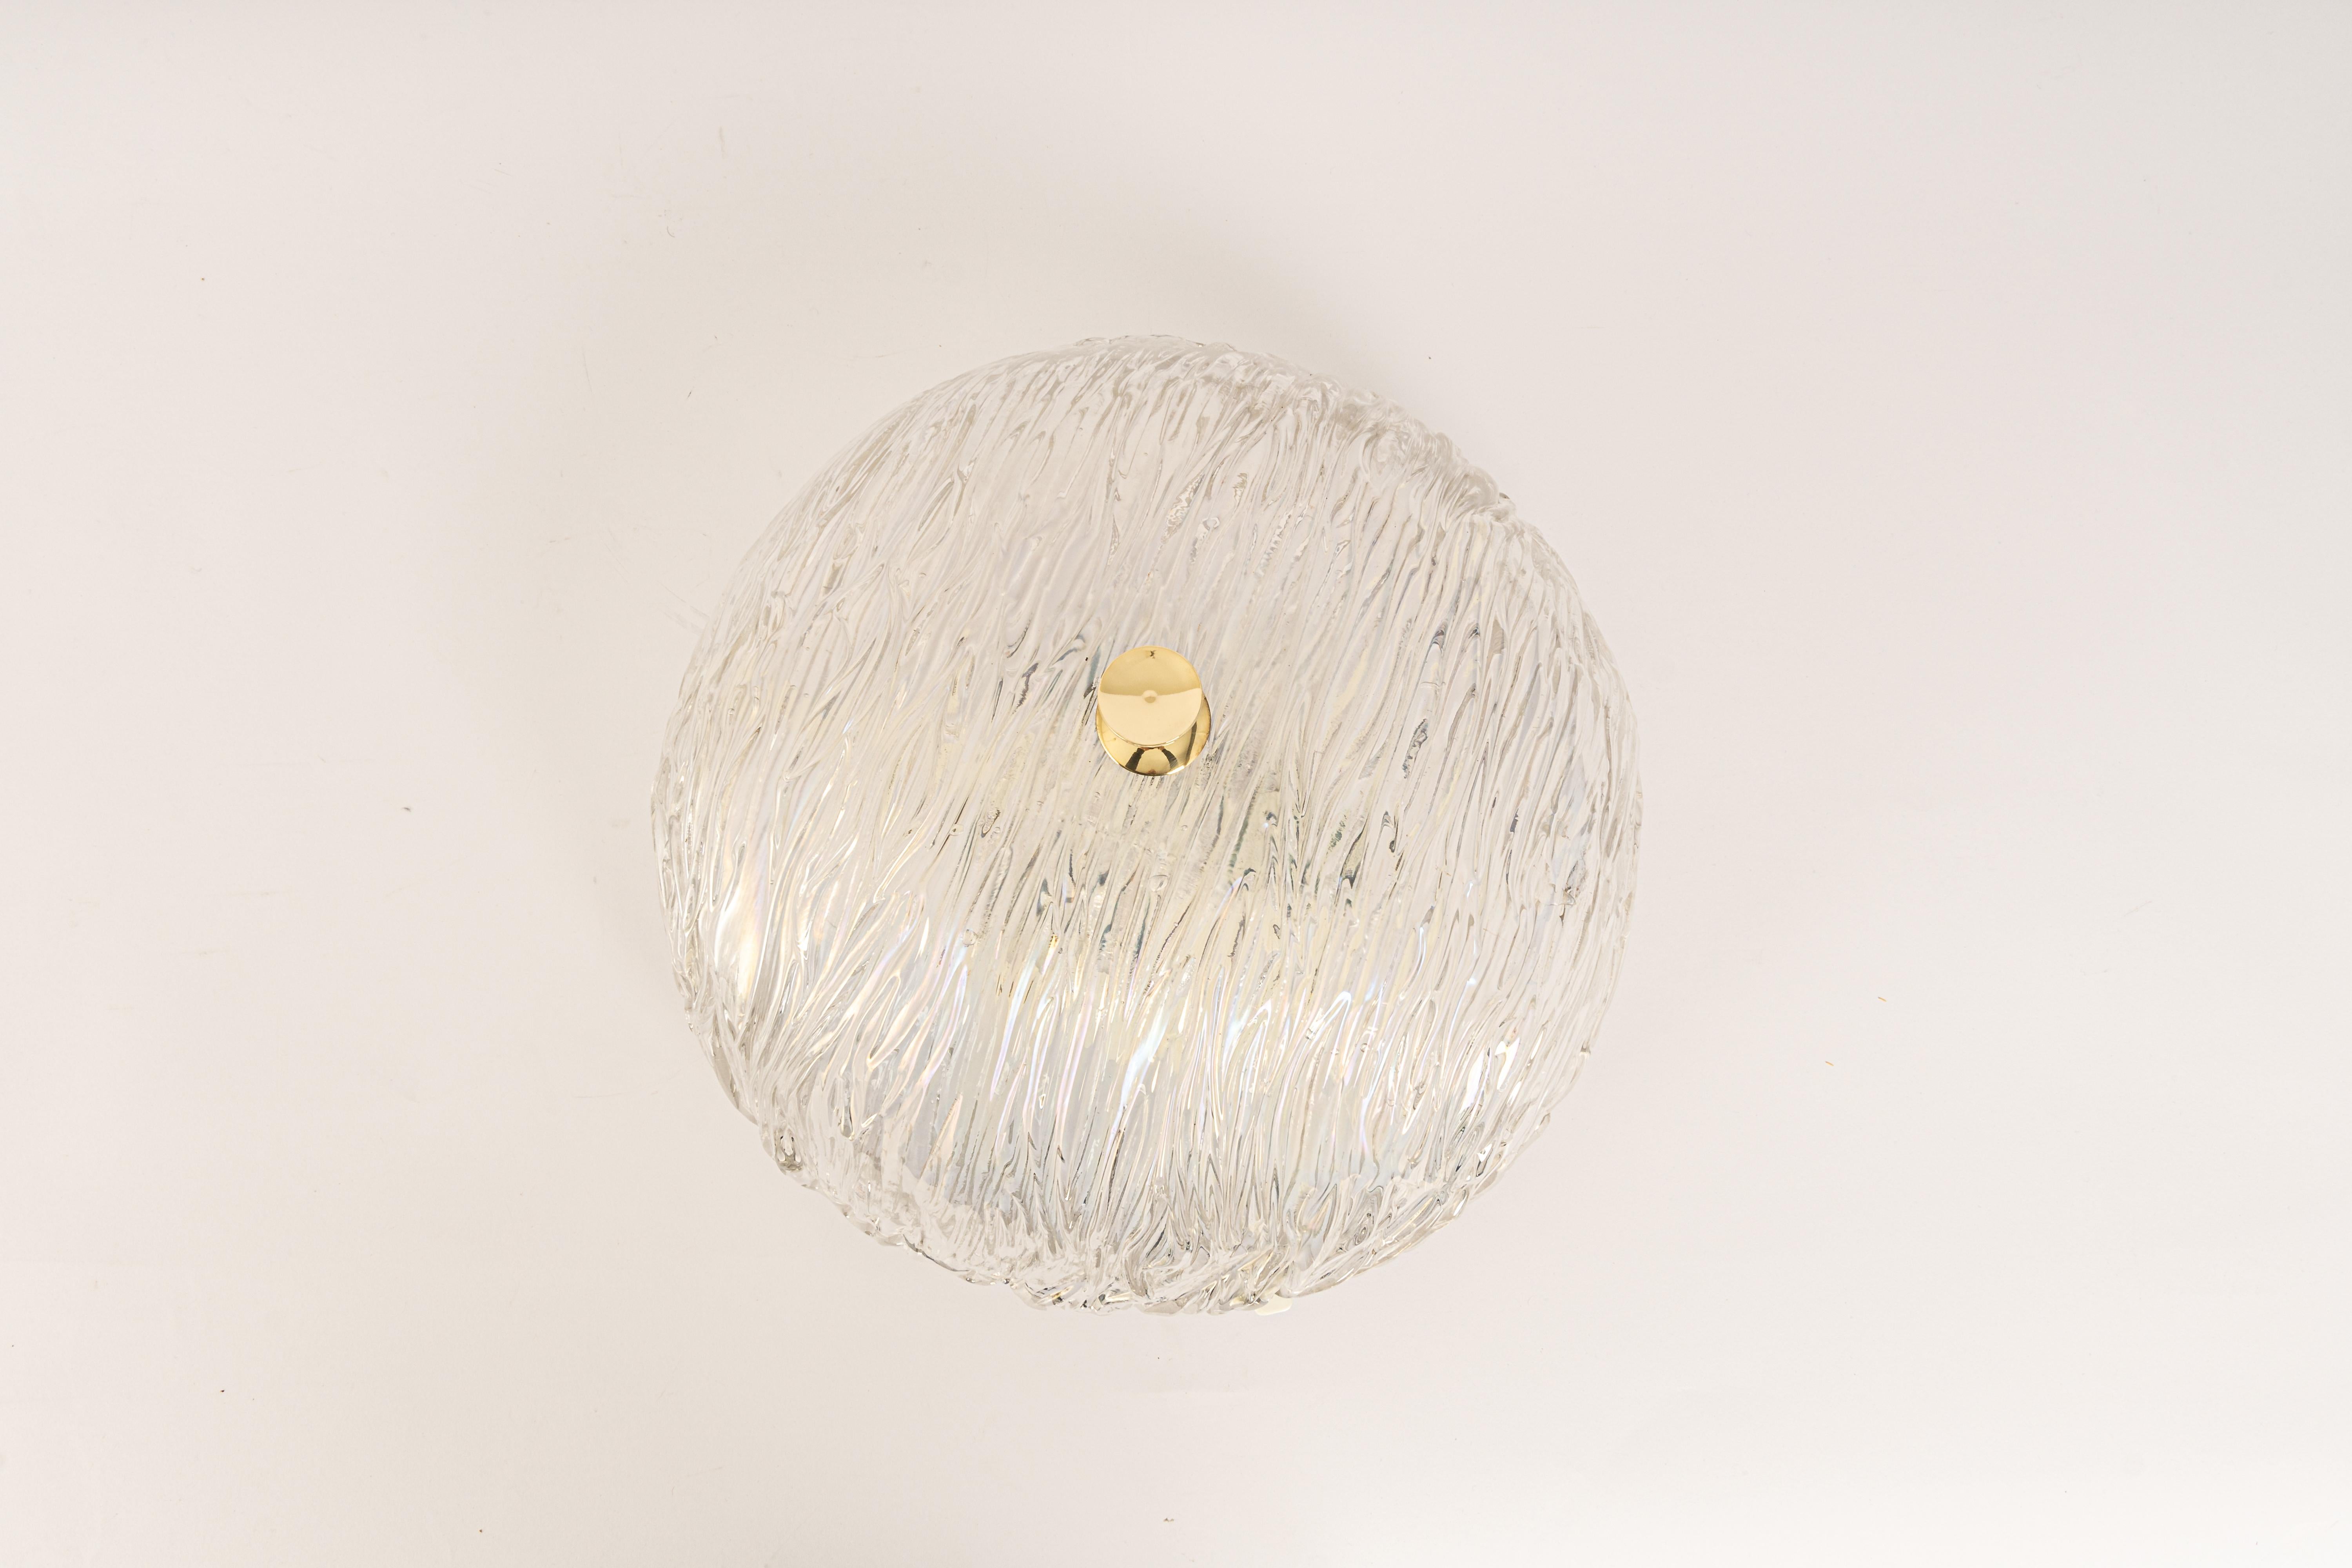 Venini ceiling lights attributed to Carlo Scarpa for Venini, 1960s.
Wonderful light effect.
The heavily textured and slightly iridescent glass dome is held in place by a brass knob

High quality and in very good condition. Cleaned, well-wired